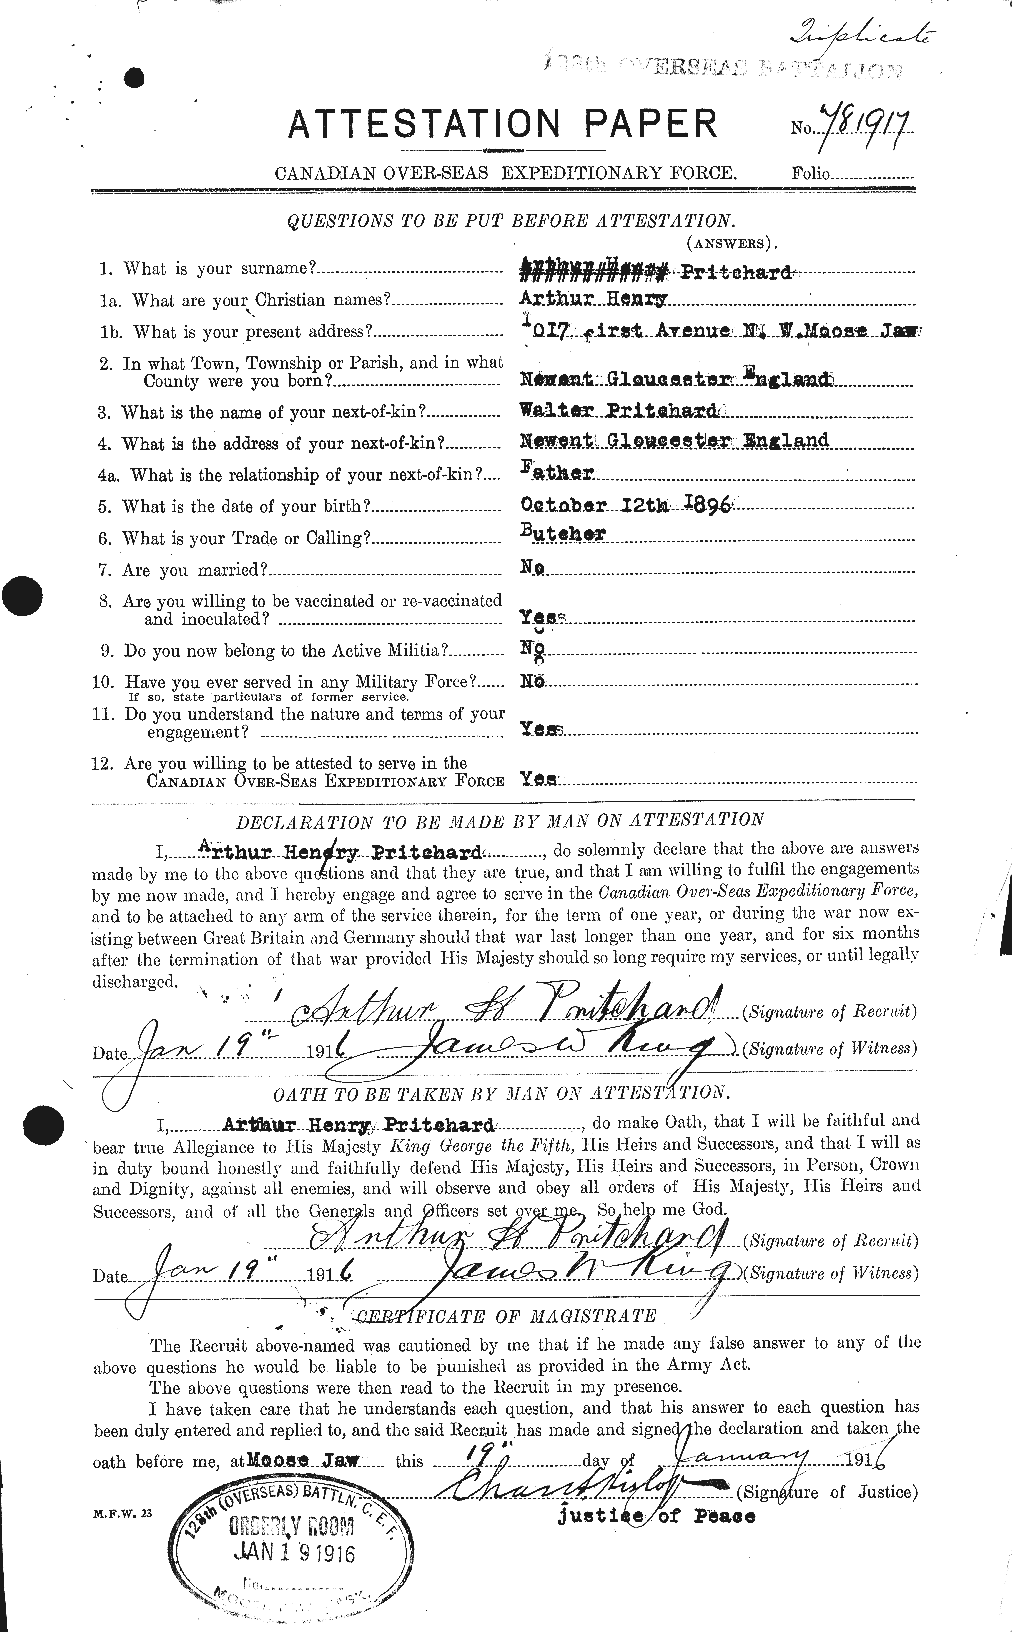 Personnel Records of the First World War - CEF 588487a